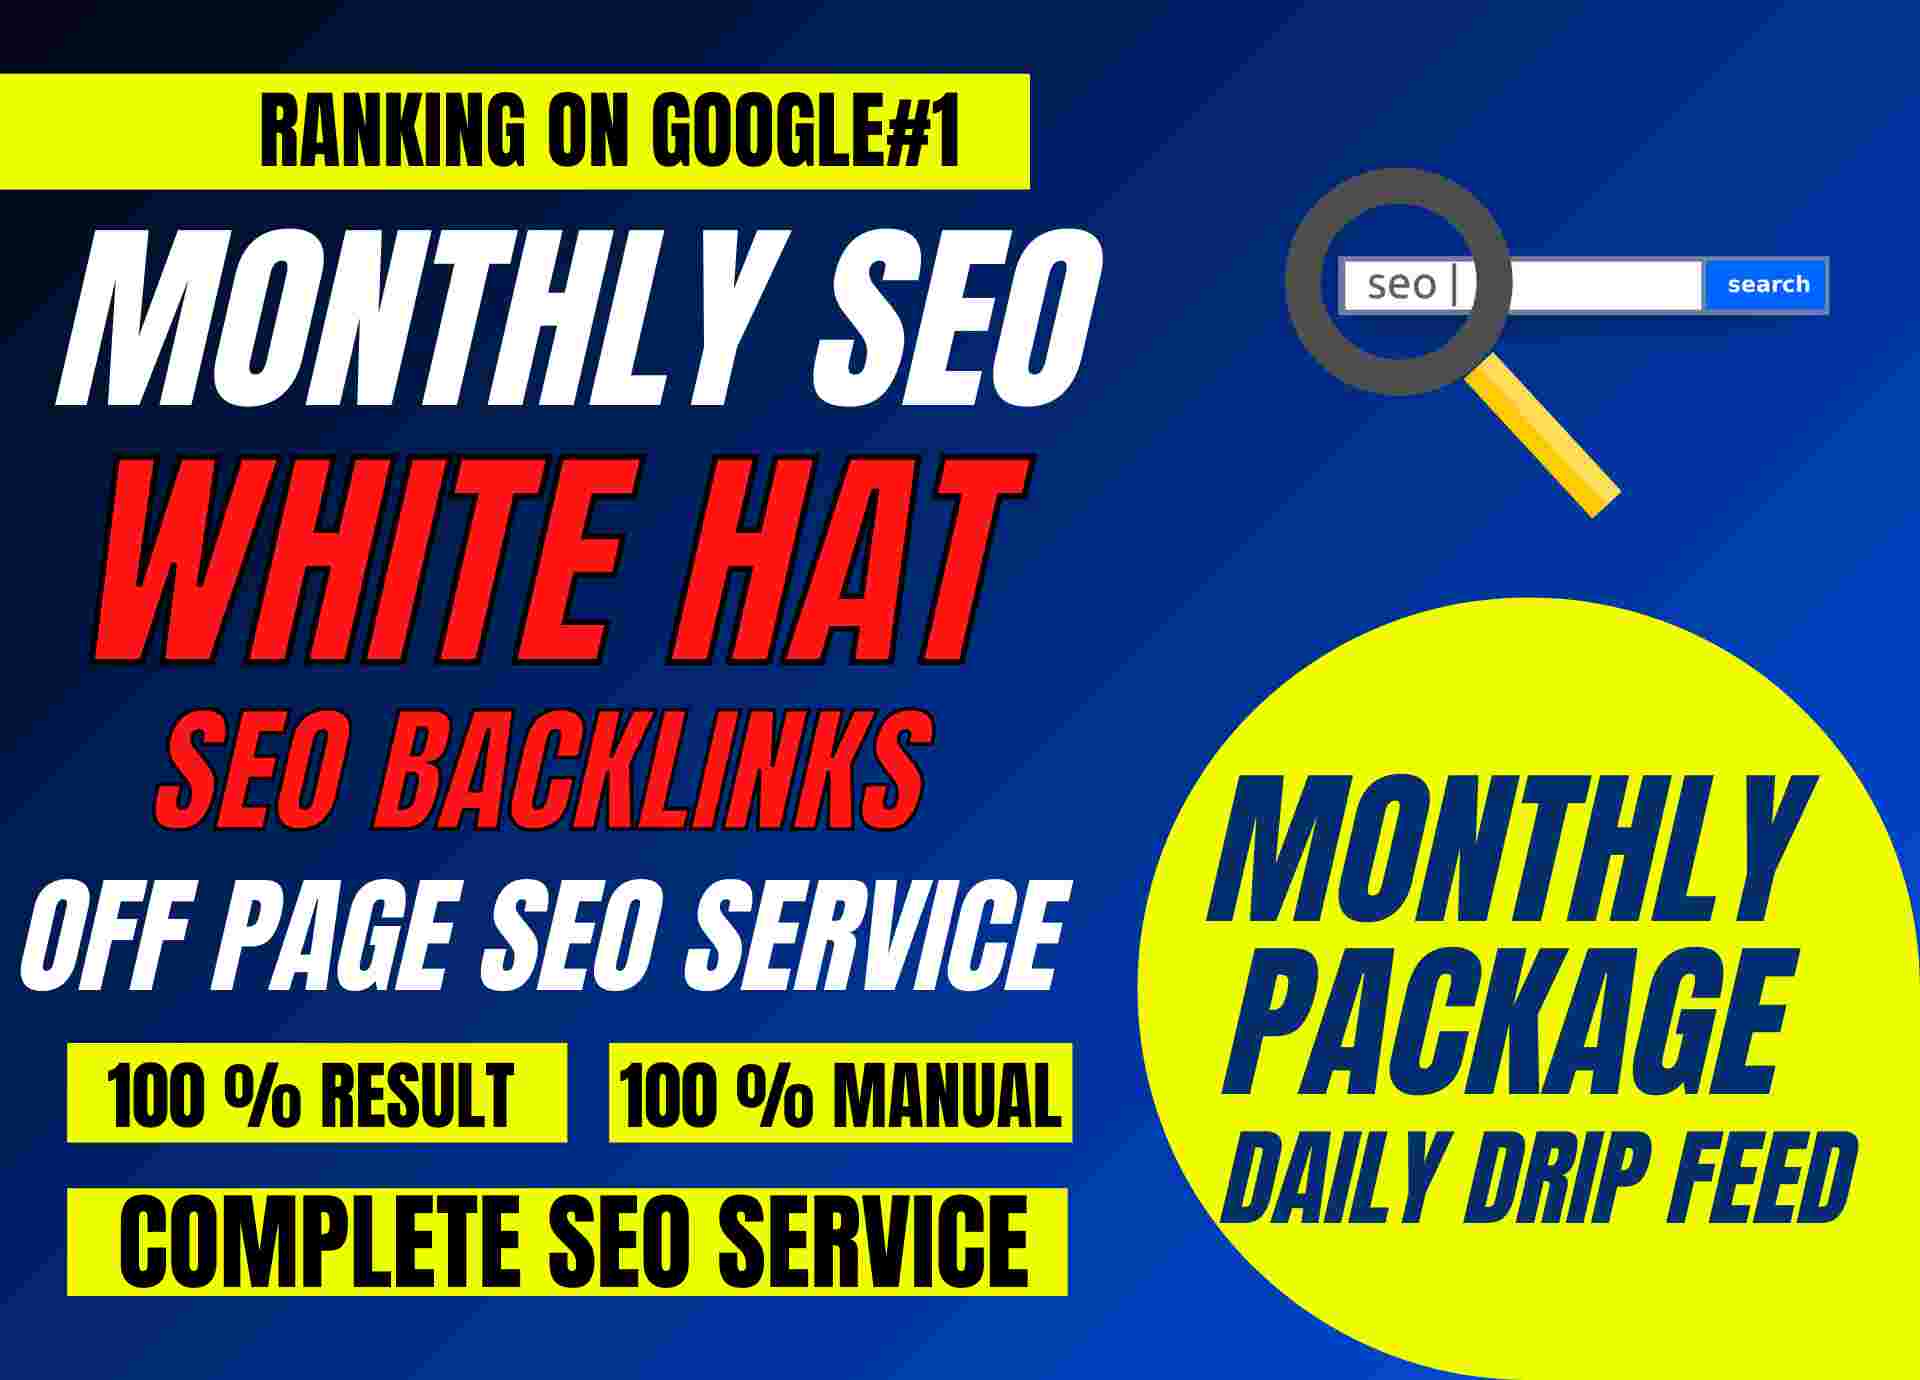 9 Million Backlinks And Pings For SEO And Search Engine Ranking